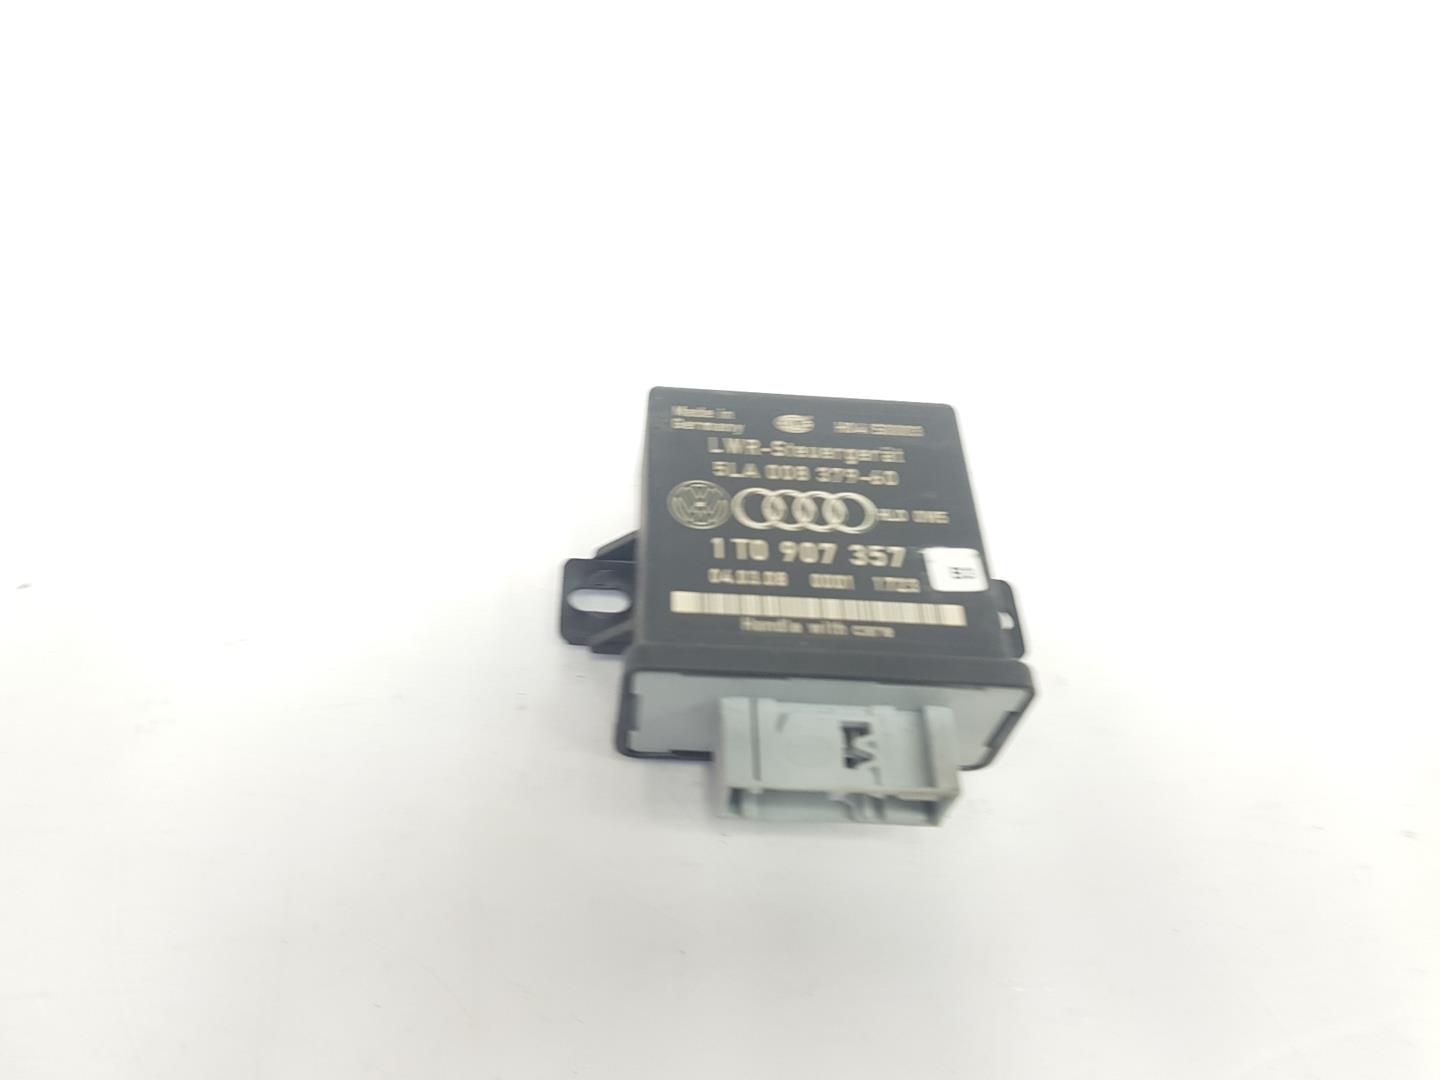 VOLKSWAGEN Golf 5 generation (2003-2009) Other Control Units 1T0907357, 1T0907357 19819892